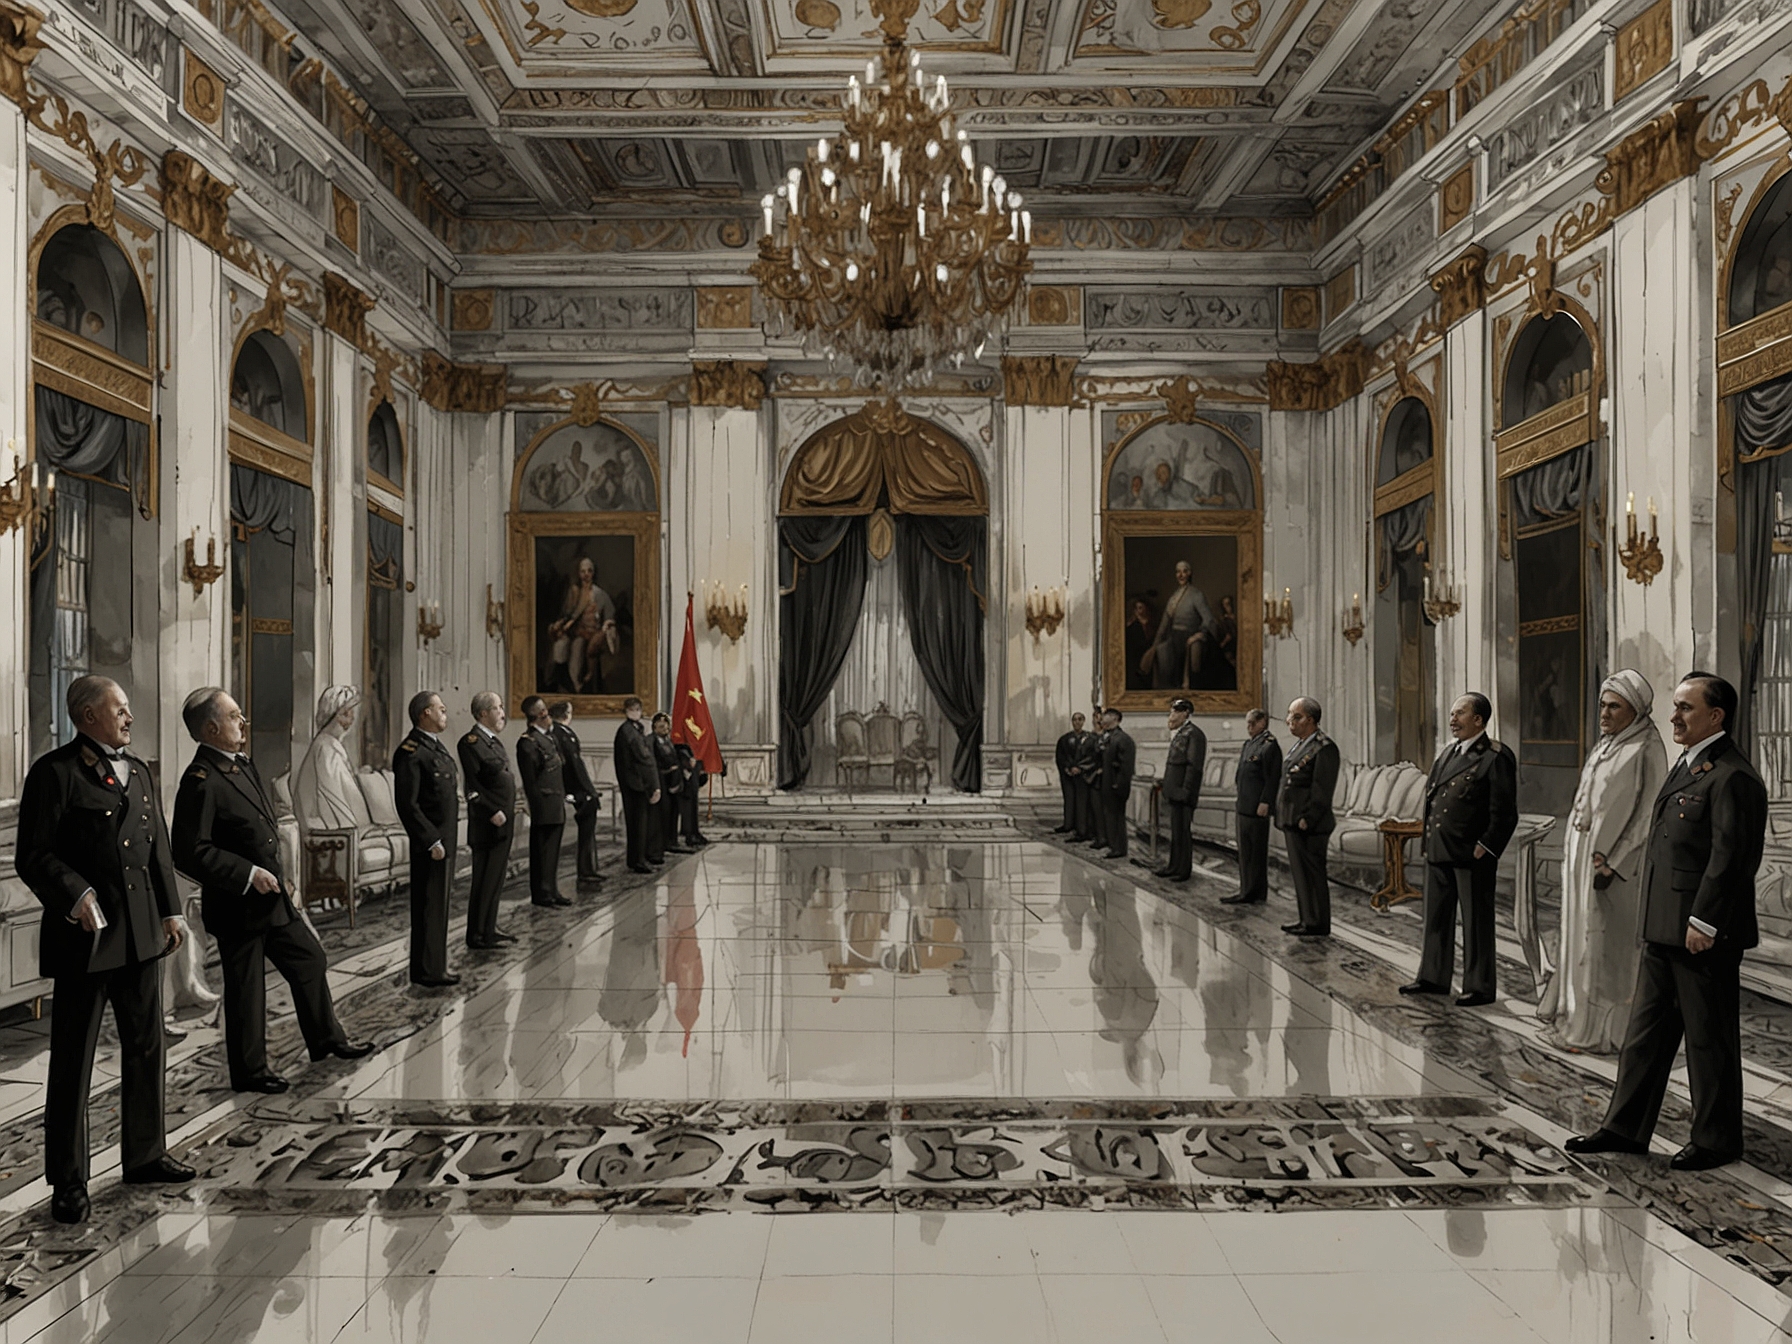 A detailed scene from 'The Regime', showcasing the grand and grotesque palace of the dictator, reflecting both the exaggerated opulence of power and the absurdity of authoritarian rule.